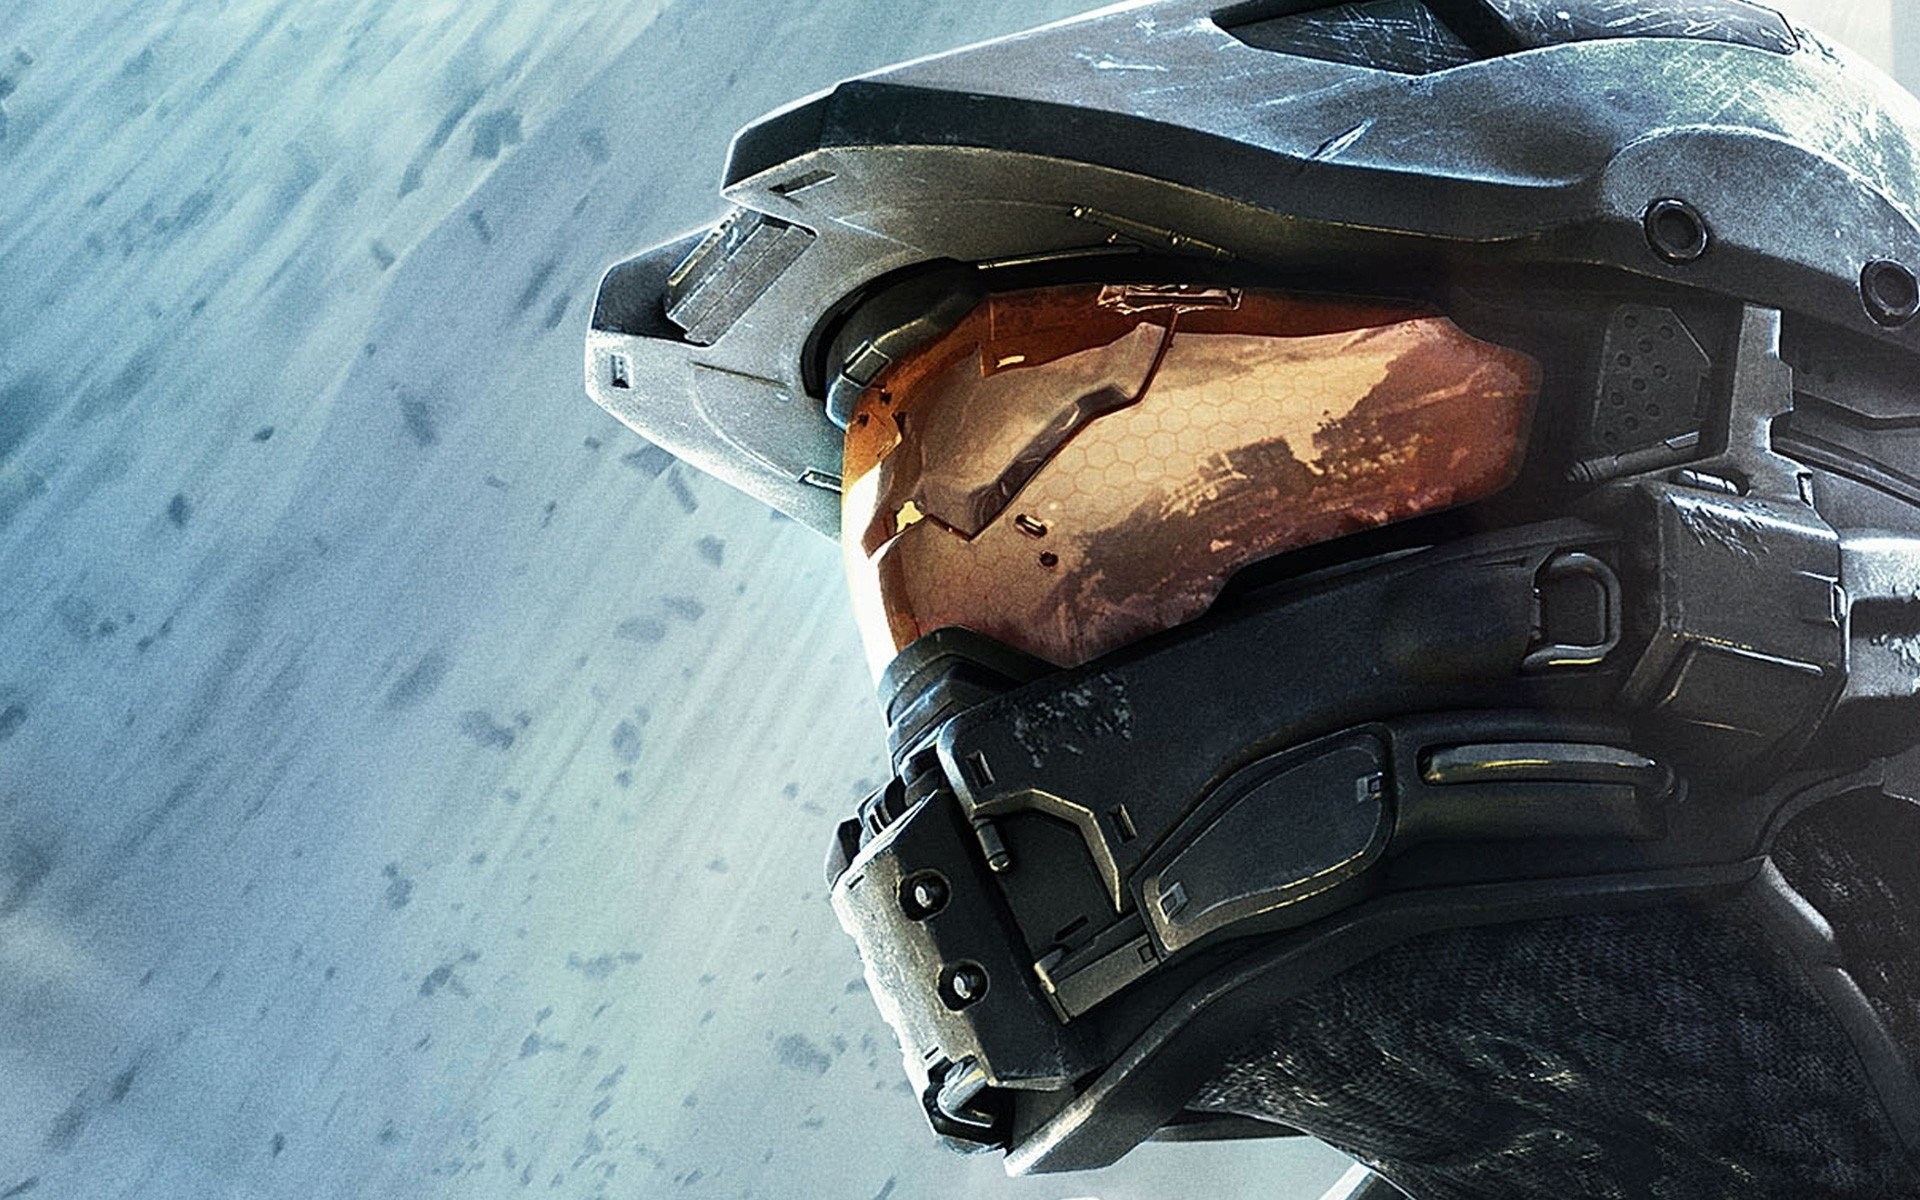 Halo Wallpaper Hd Download Free Awesome Backgrounds For Images, Photos, Reviews